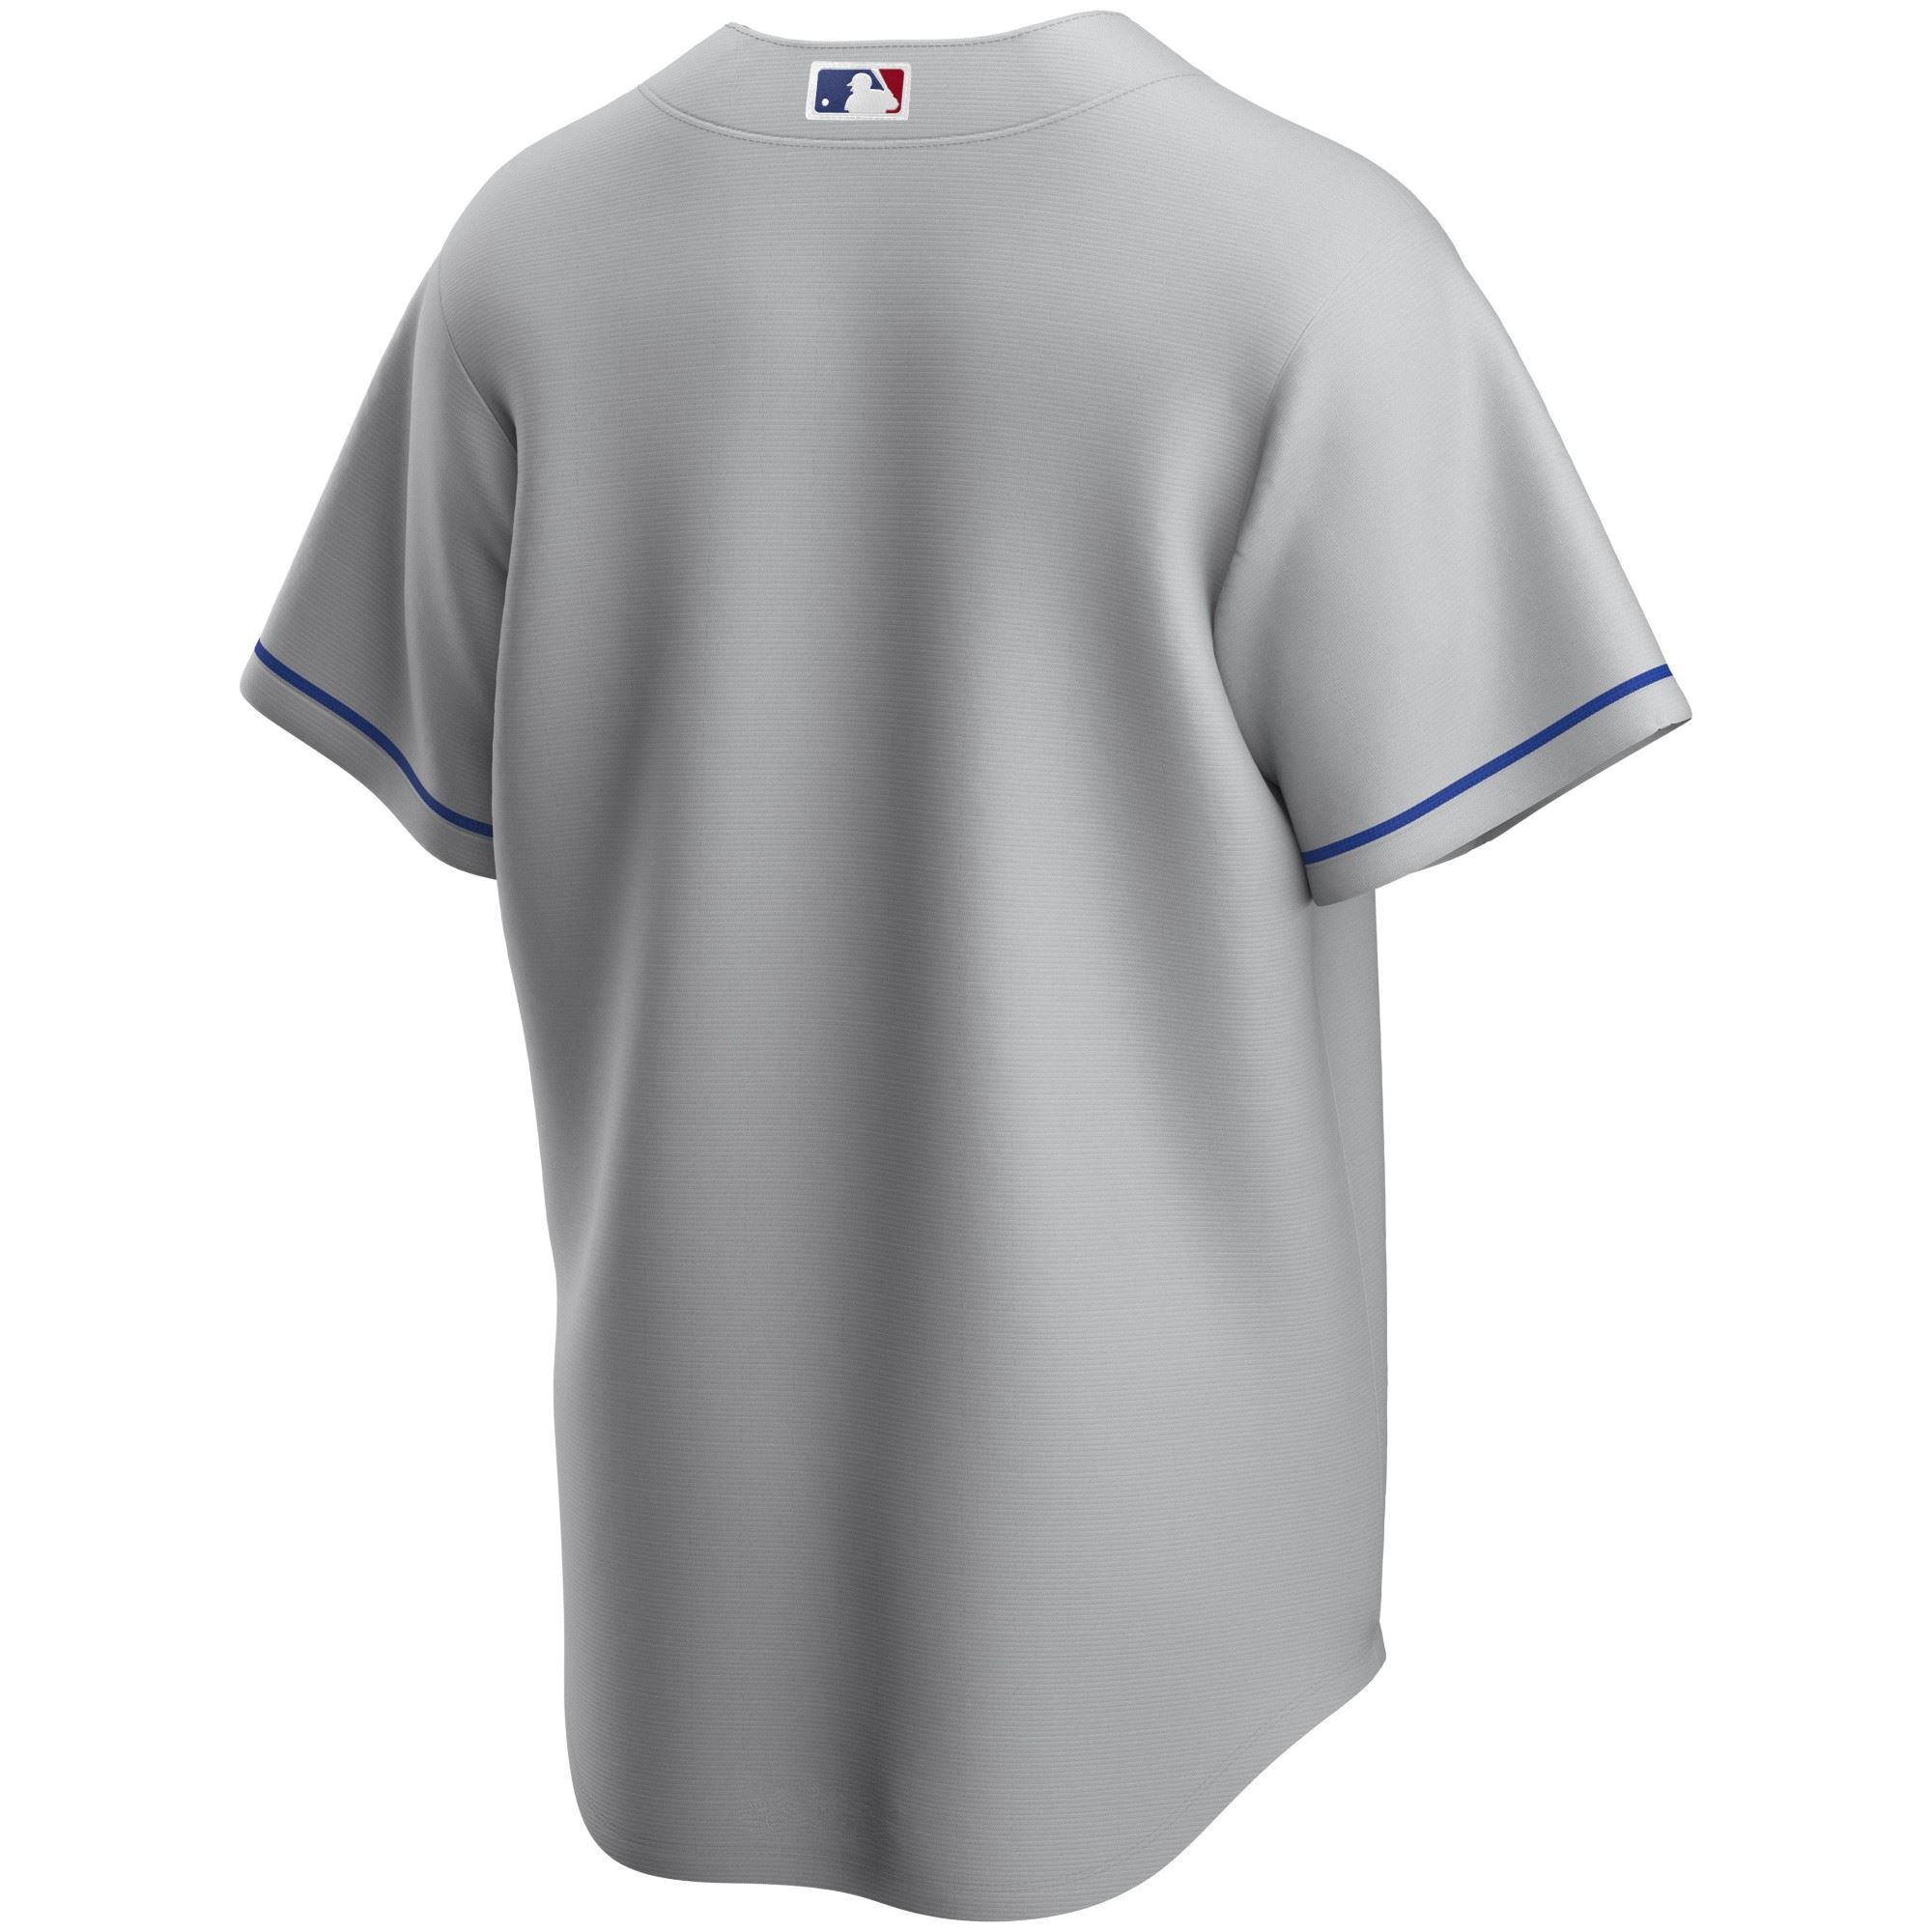 Los Angeles Dodgers Official MLB Replica Road Jersey Grey Nike